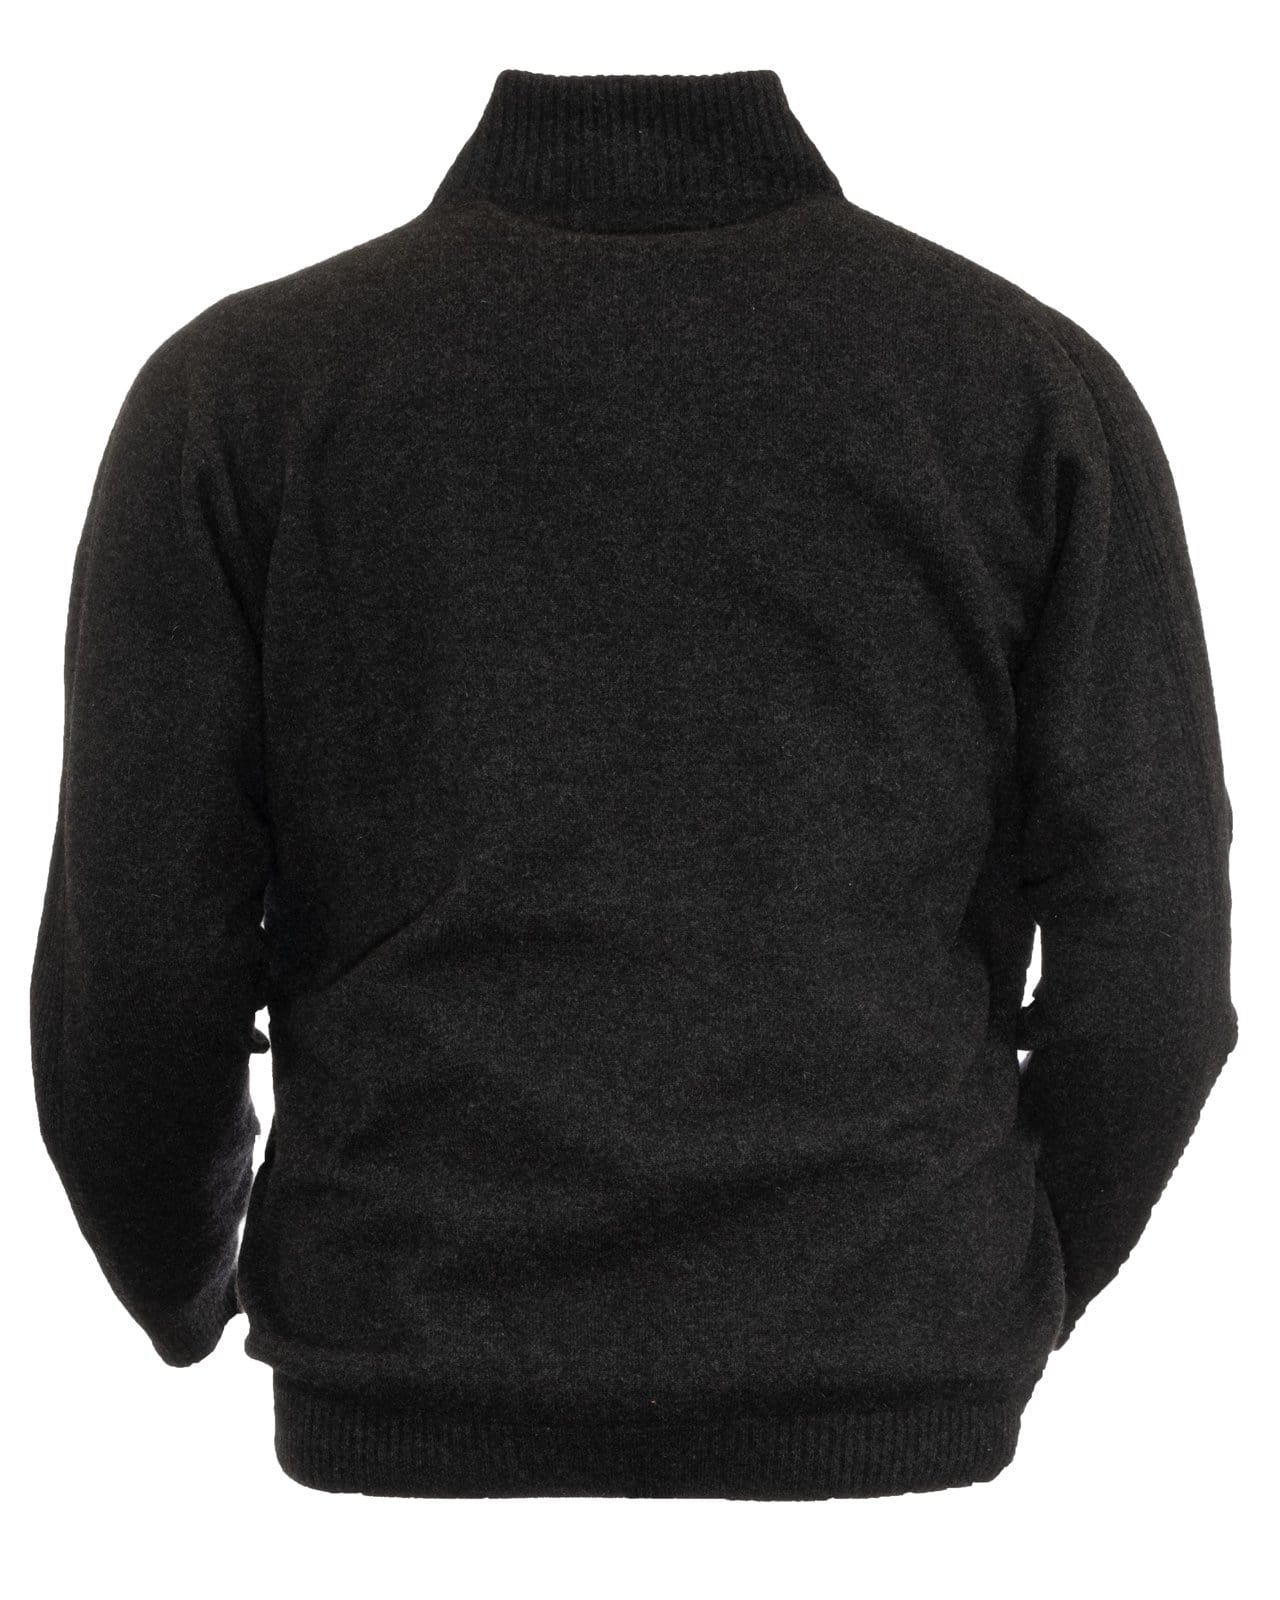 Outback Trading Company Men’s Palmerston Merino Sweater Shirts & Tops